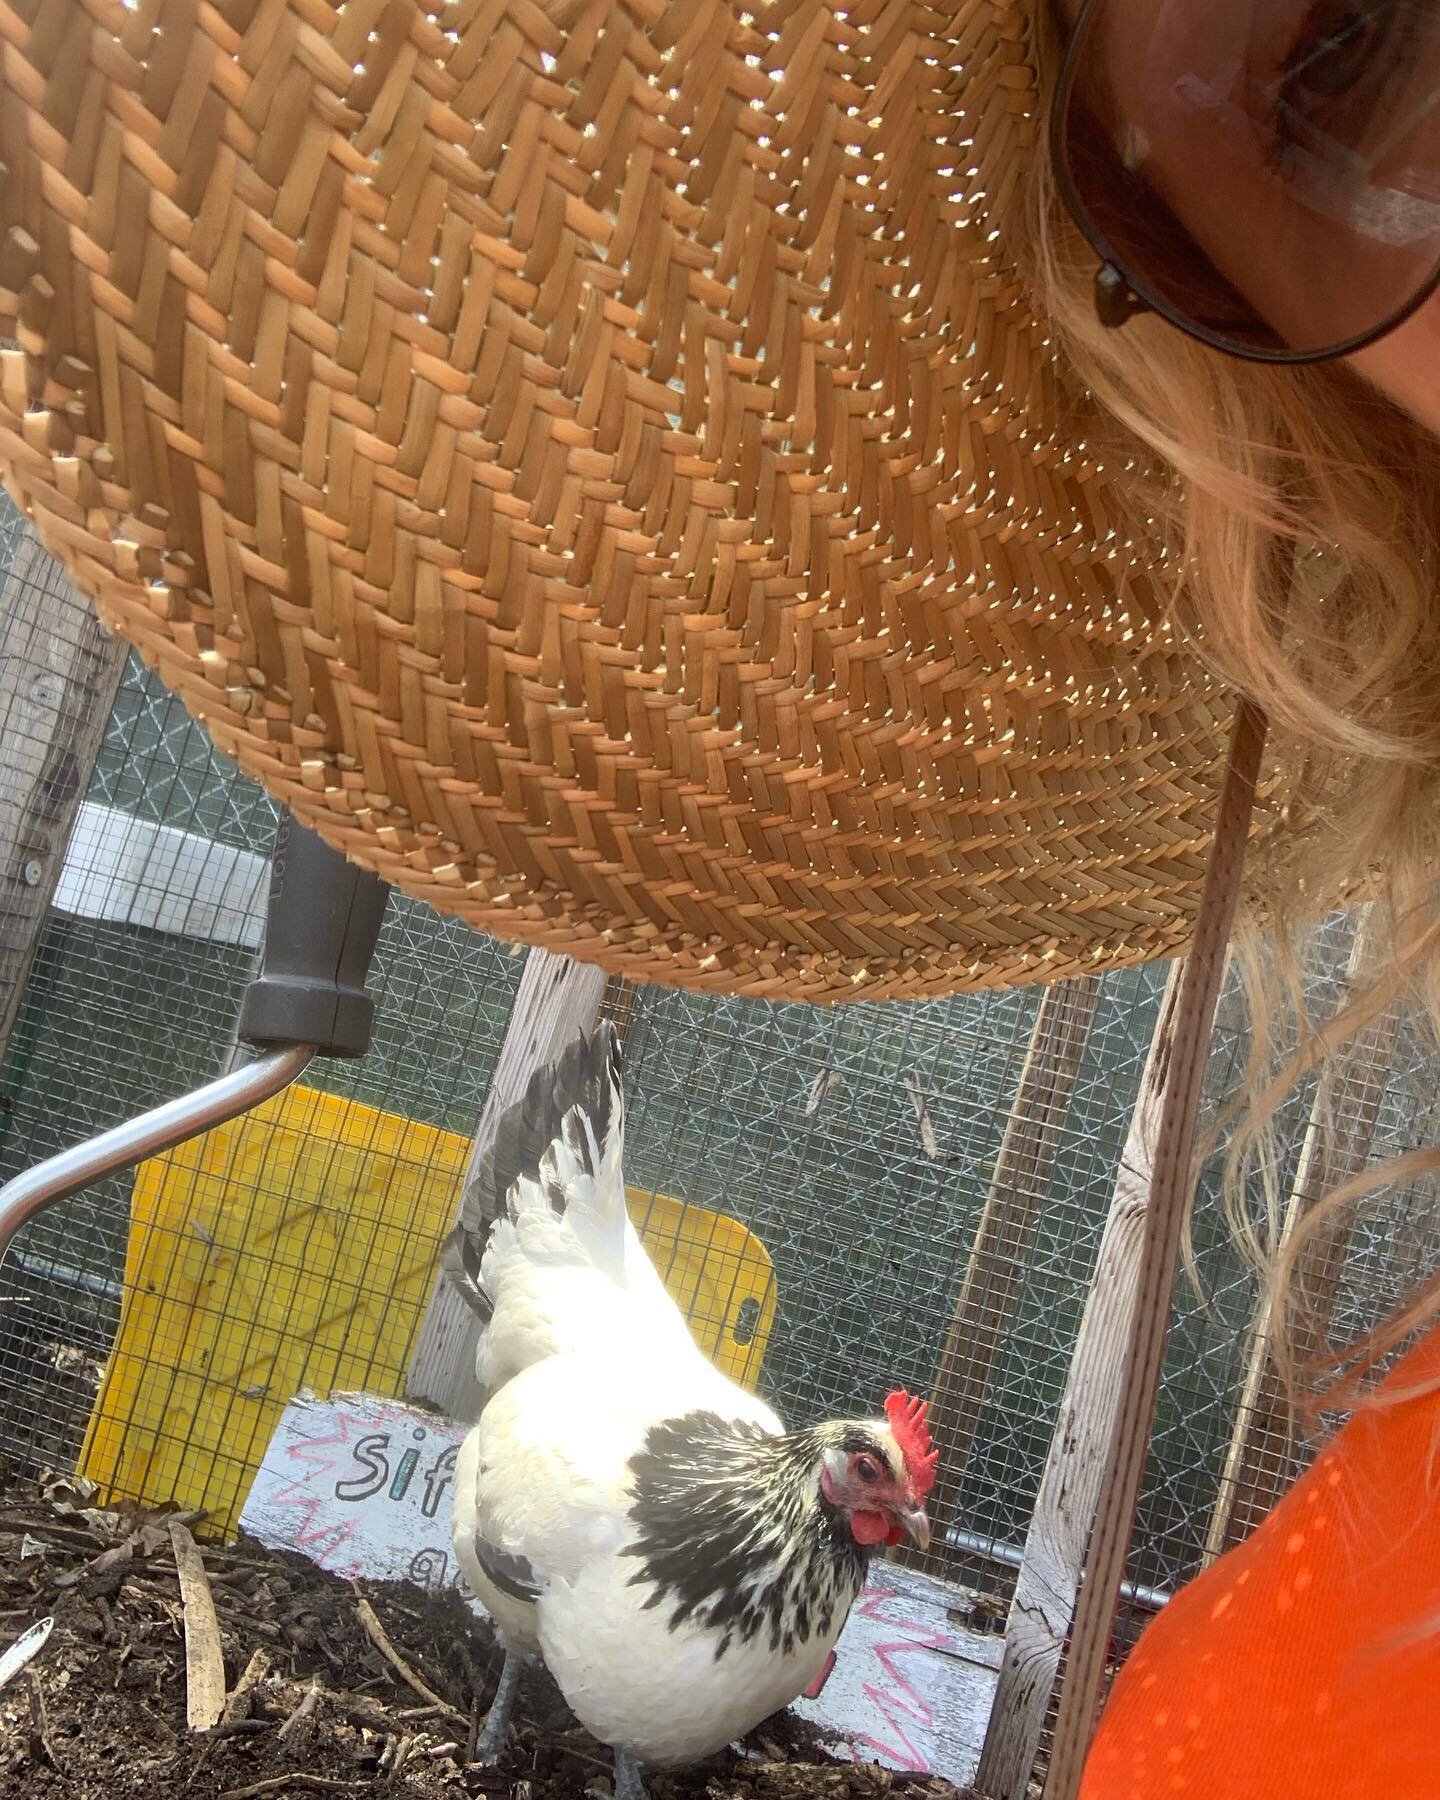 New friend from volunteering today with @earthmatterny for the Compost Project. Sorted compost with kids, pet the chooks and talked to people about worm bins 🪱 PSA: take your stickers off your fruit before composting, por favor.